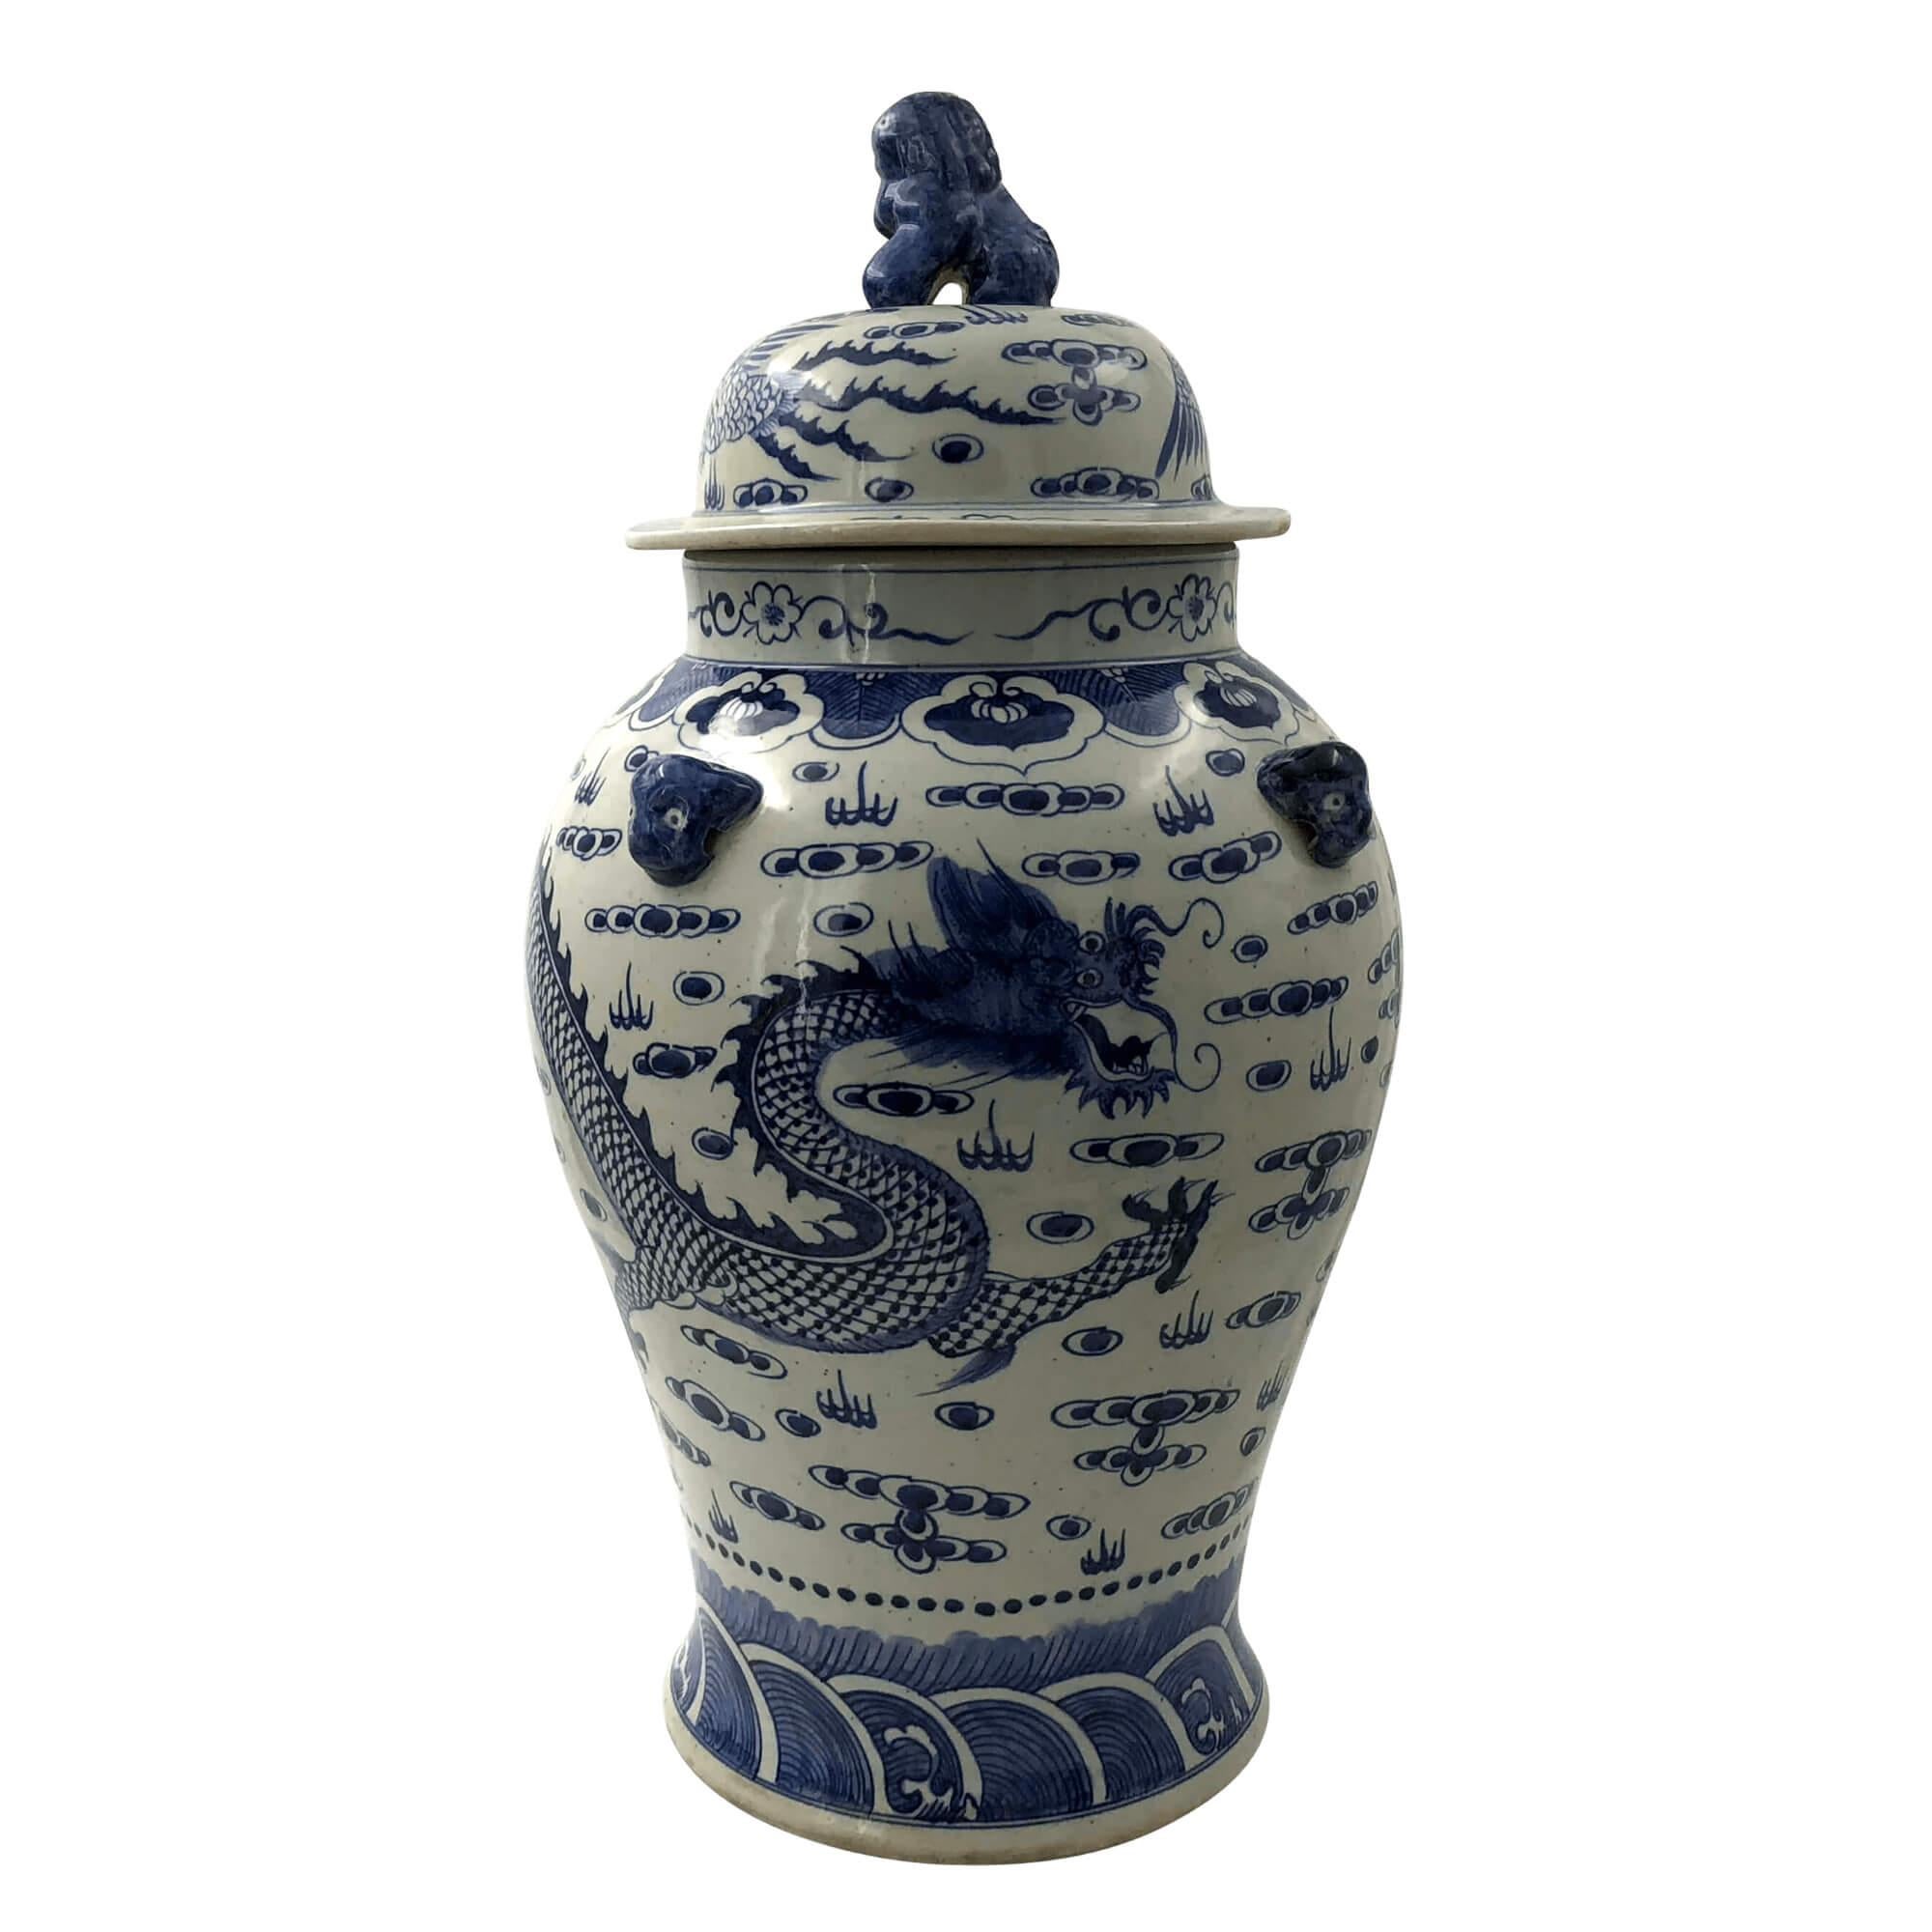 Large hand-painted Chinese export blue and white lidded Ginger jars decorated with dragon phoenix patterns. 

Dimensions: 14.25